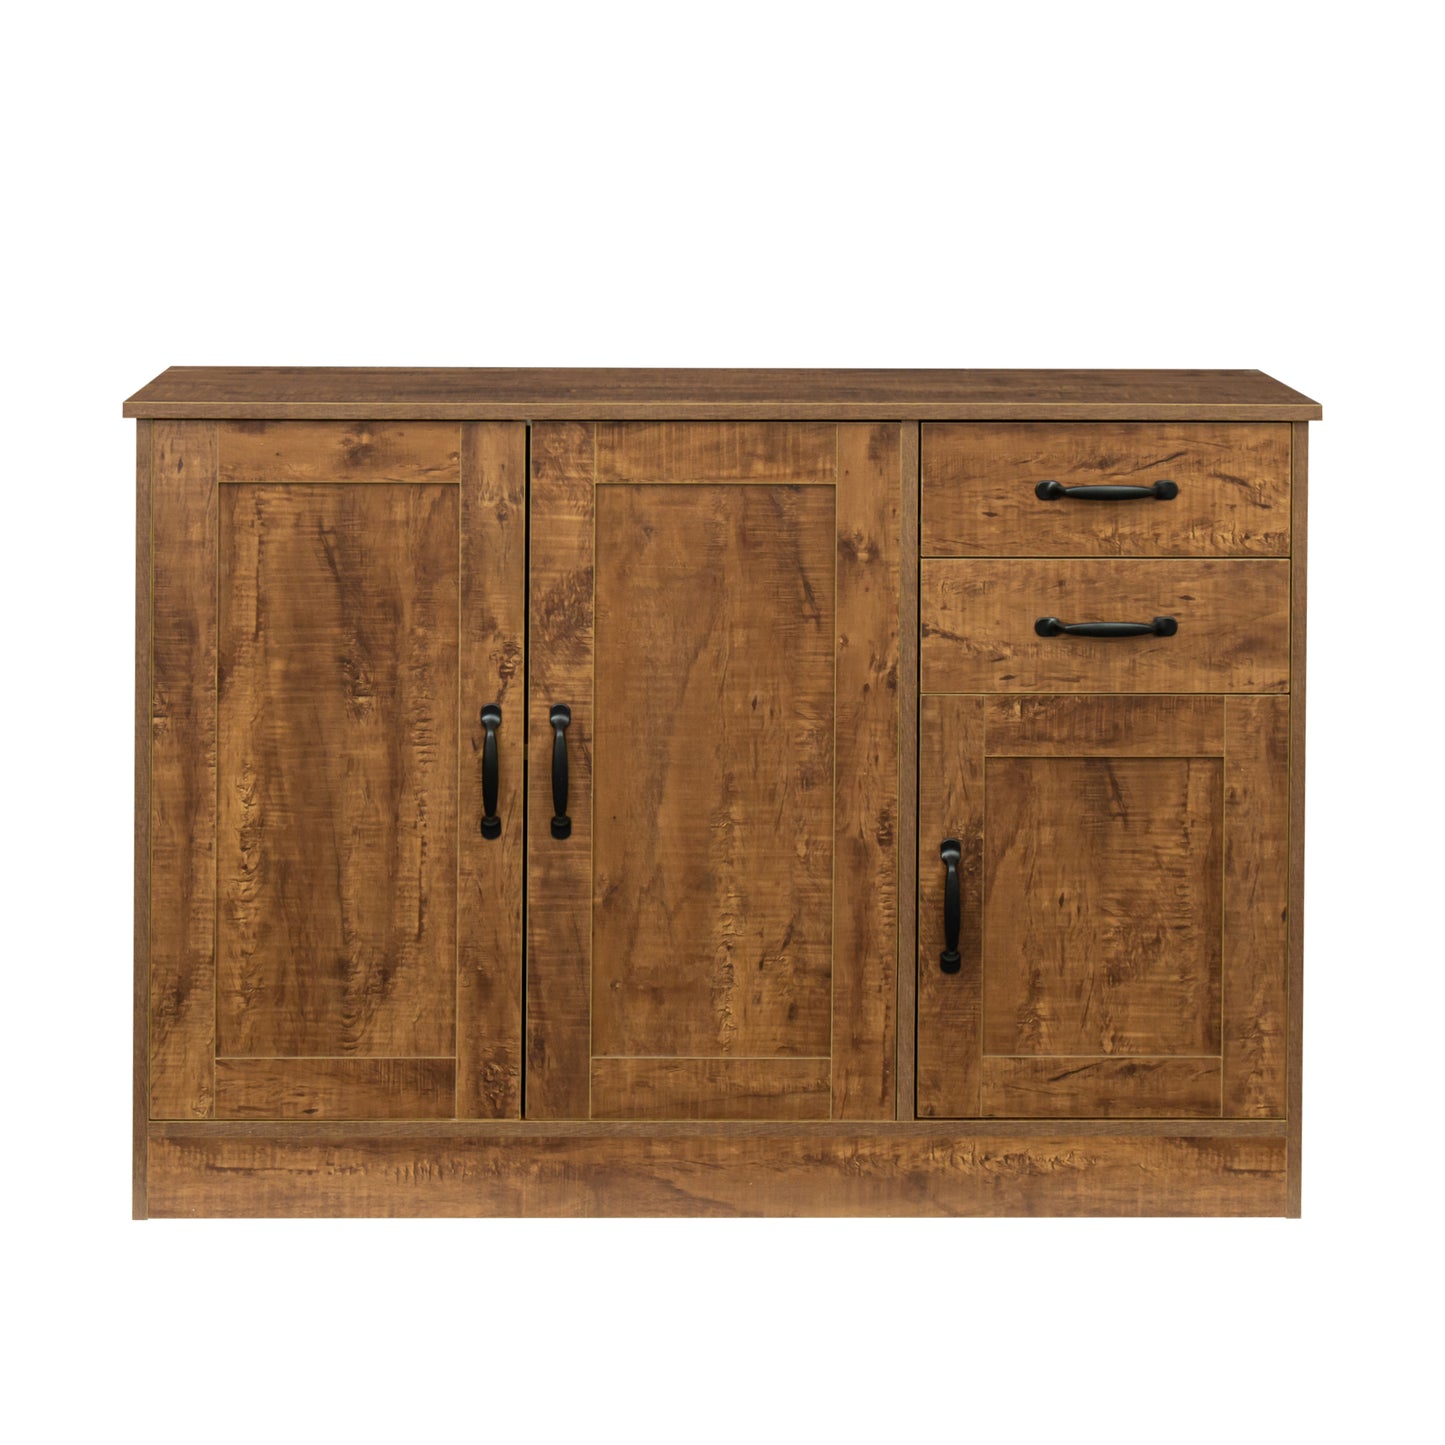 Modern Wood Buffet Sideboard with 2 doors&1 Storage and 2drawers -Entryway Serving Storage Cabinet Doors-Dining Room Console, 43.3 Inch, Dark Walnut